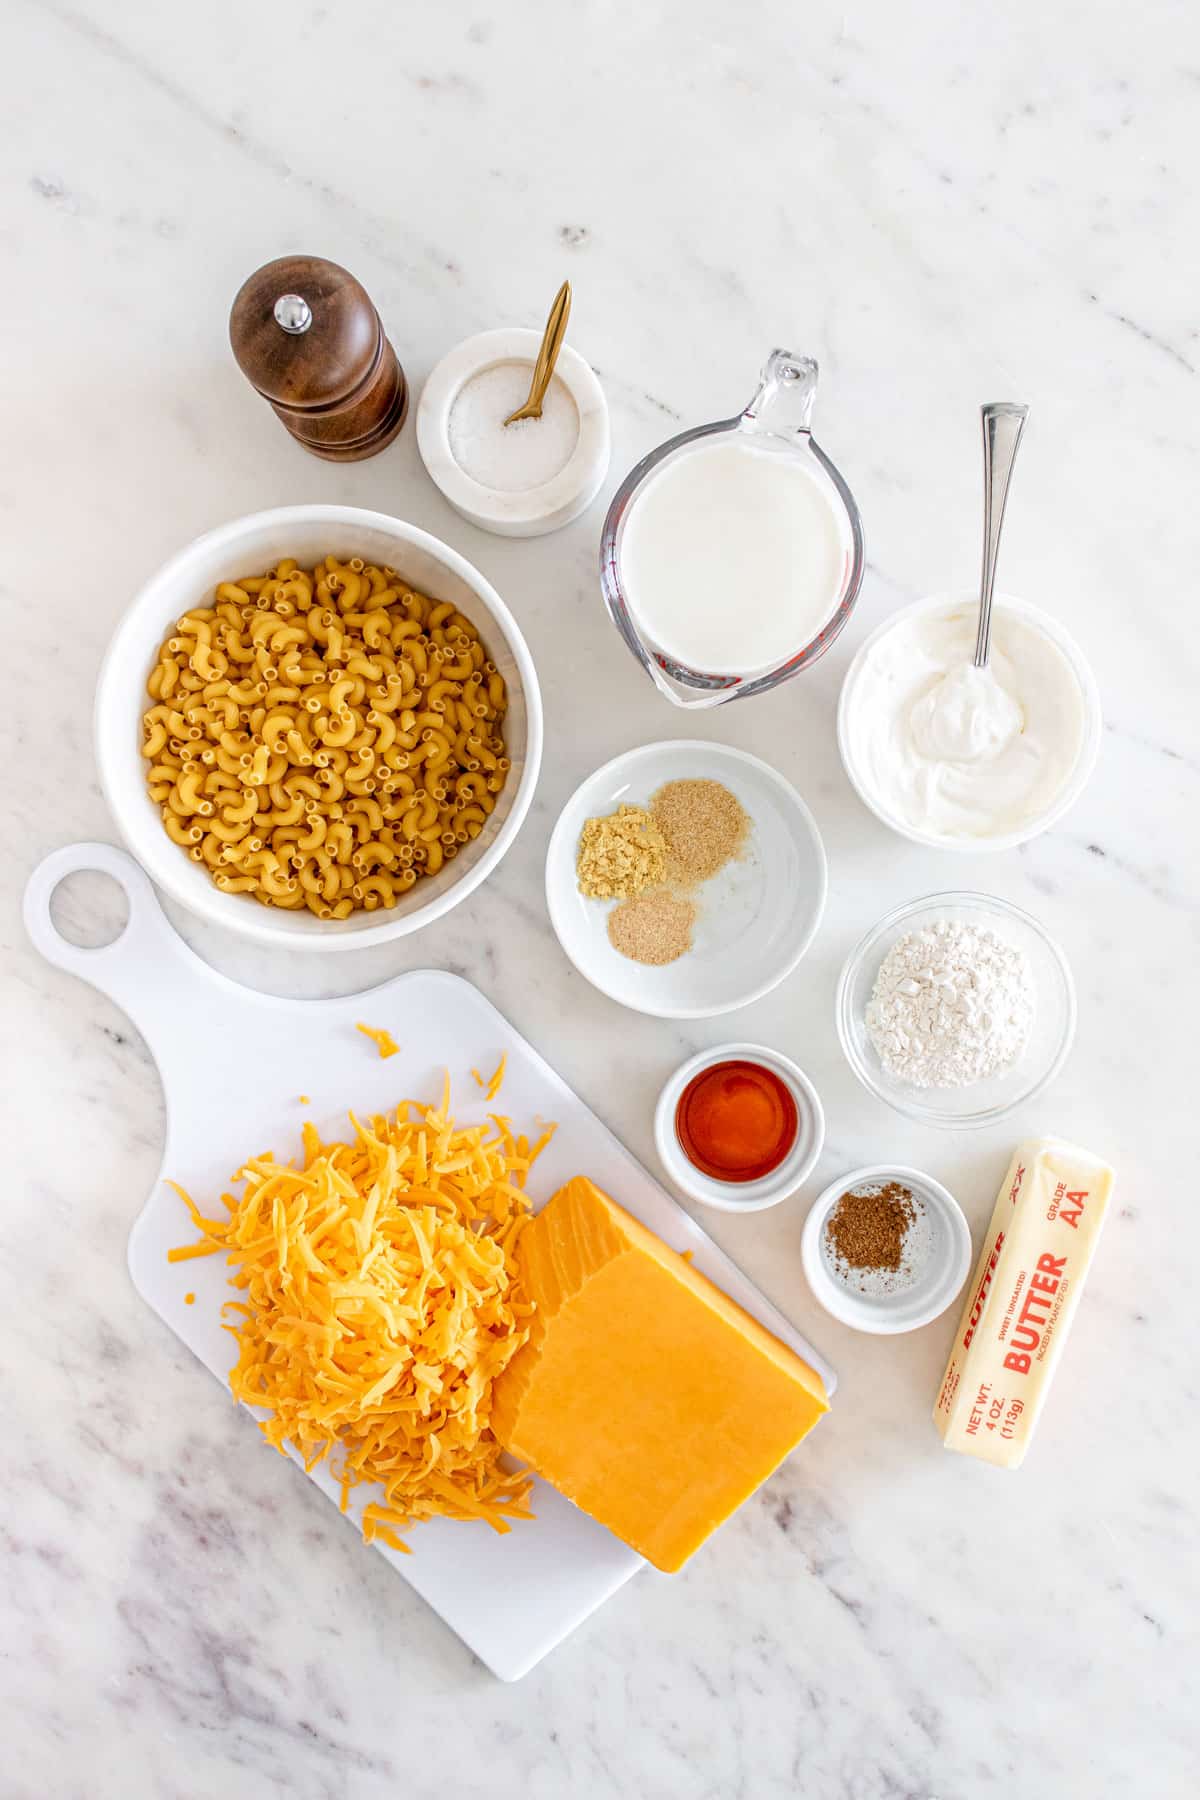 Ingredients for Stovetop Mac and Cheese on a white marble counter include elbow macaroni, butter, all-purpose flour, whole milk, sour cream, garlic powder, mustard powder and ground nutmeg, hot sauce, and sharp cheddar cheese.